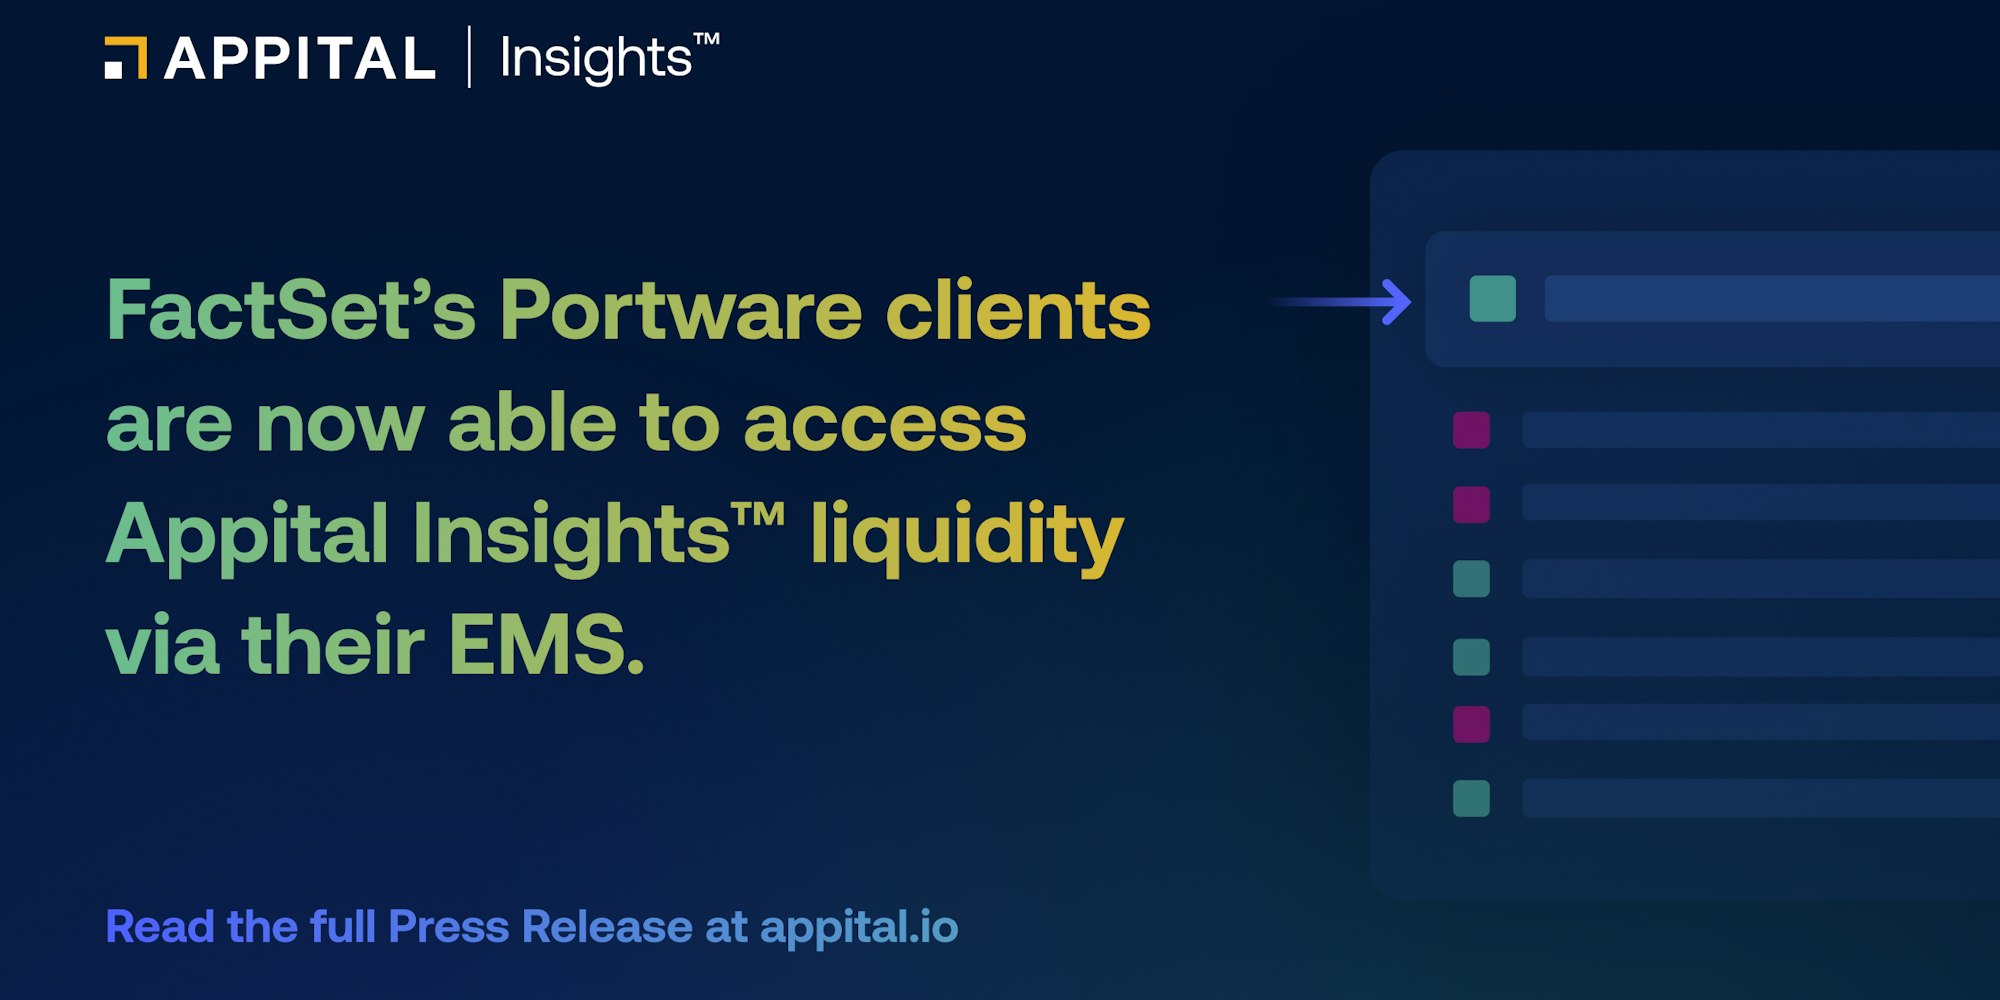 Appital Insights™ now fully integrated with FactSet’s Portware EMS